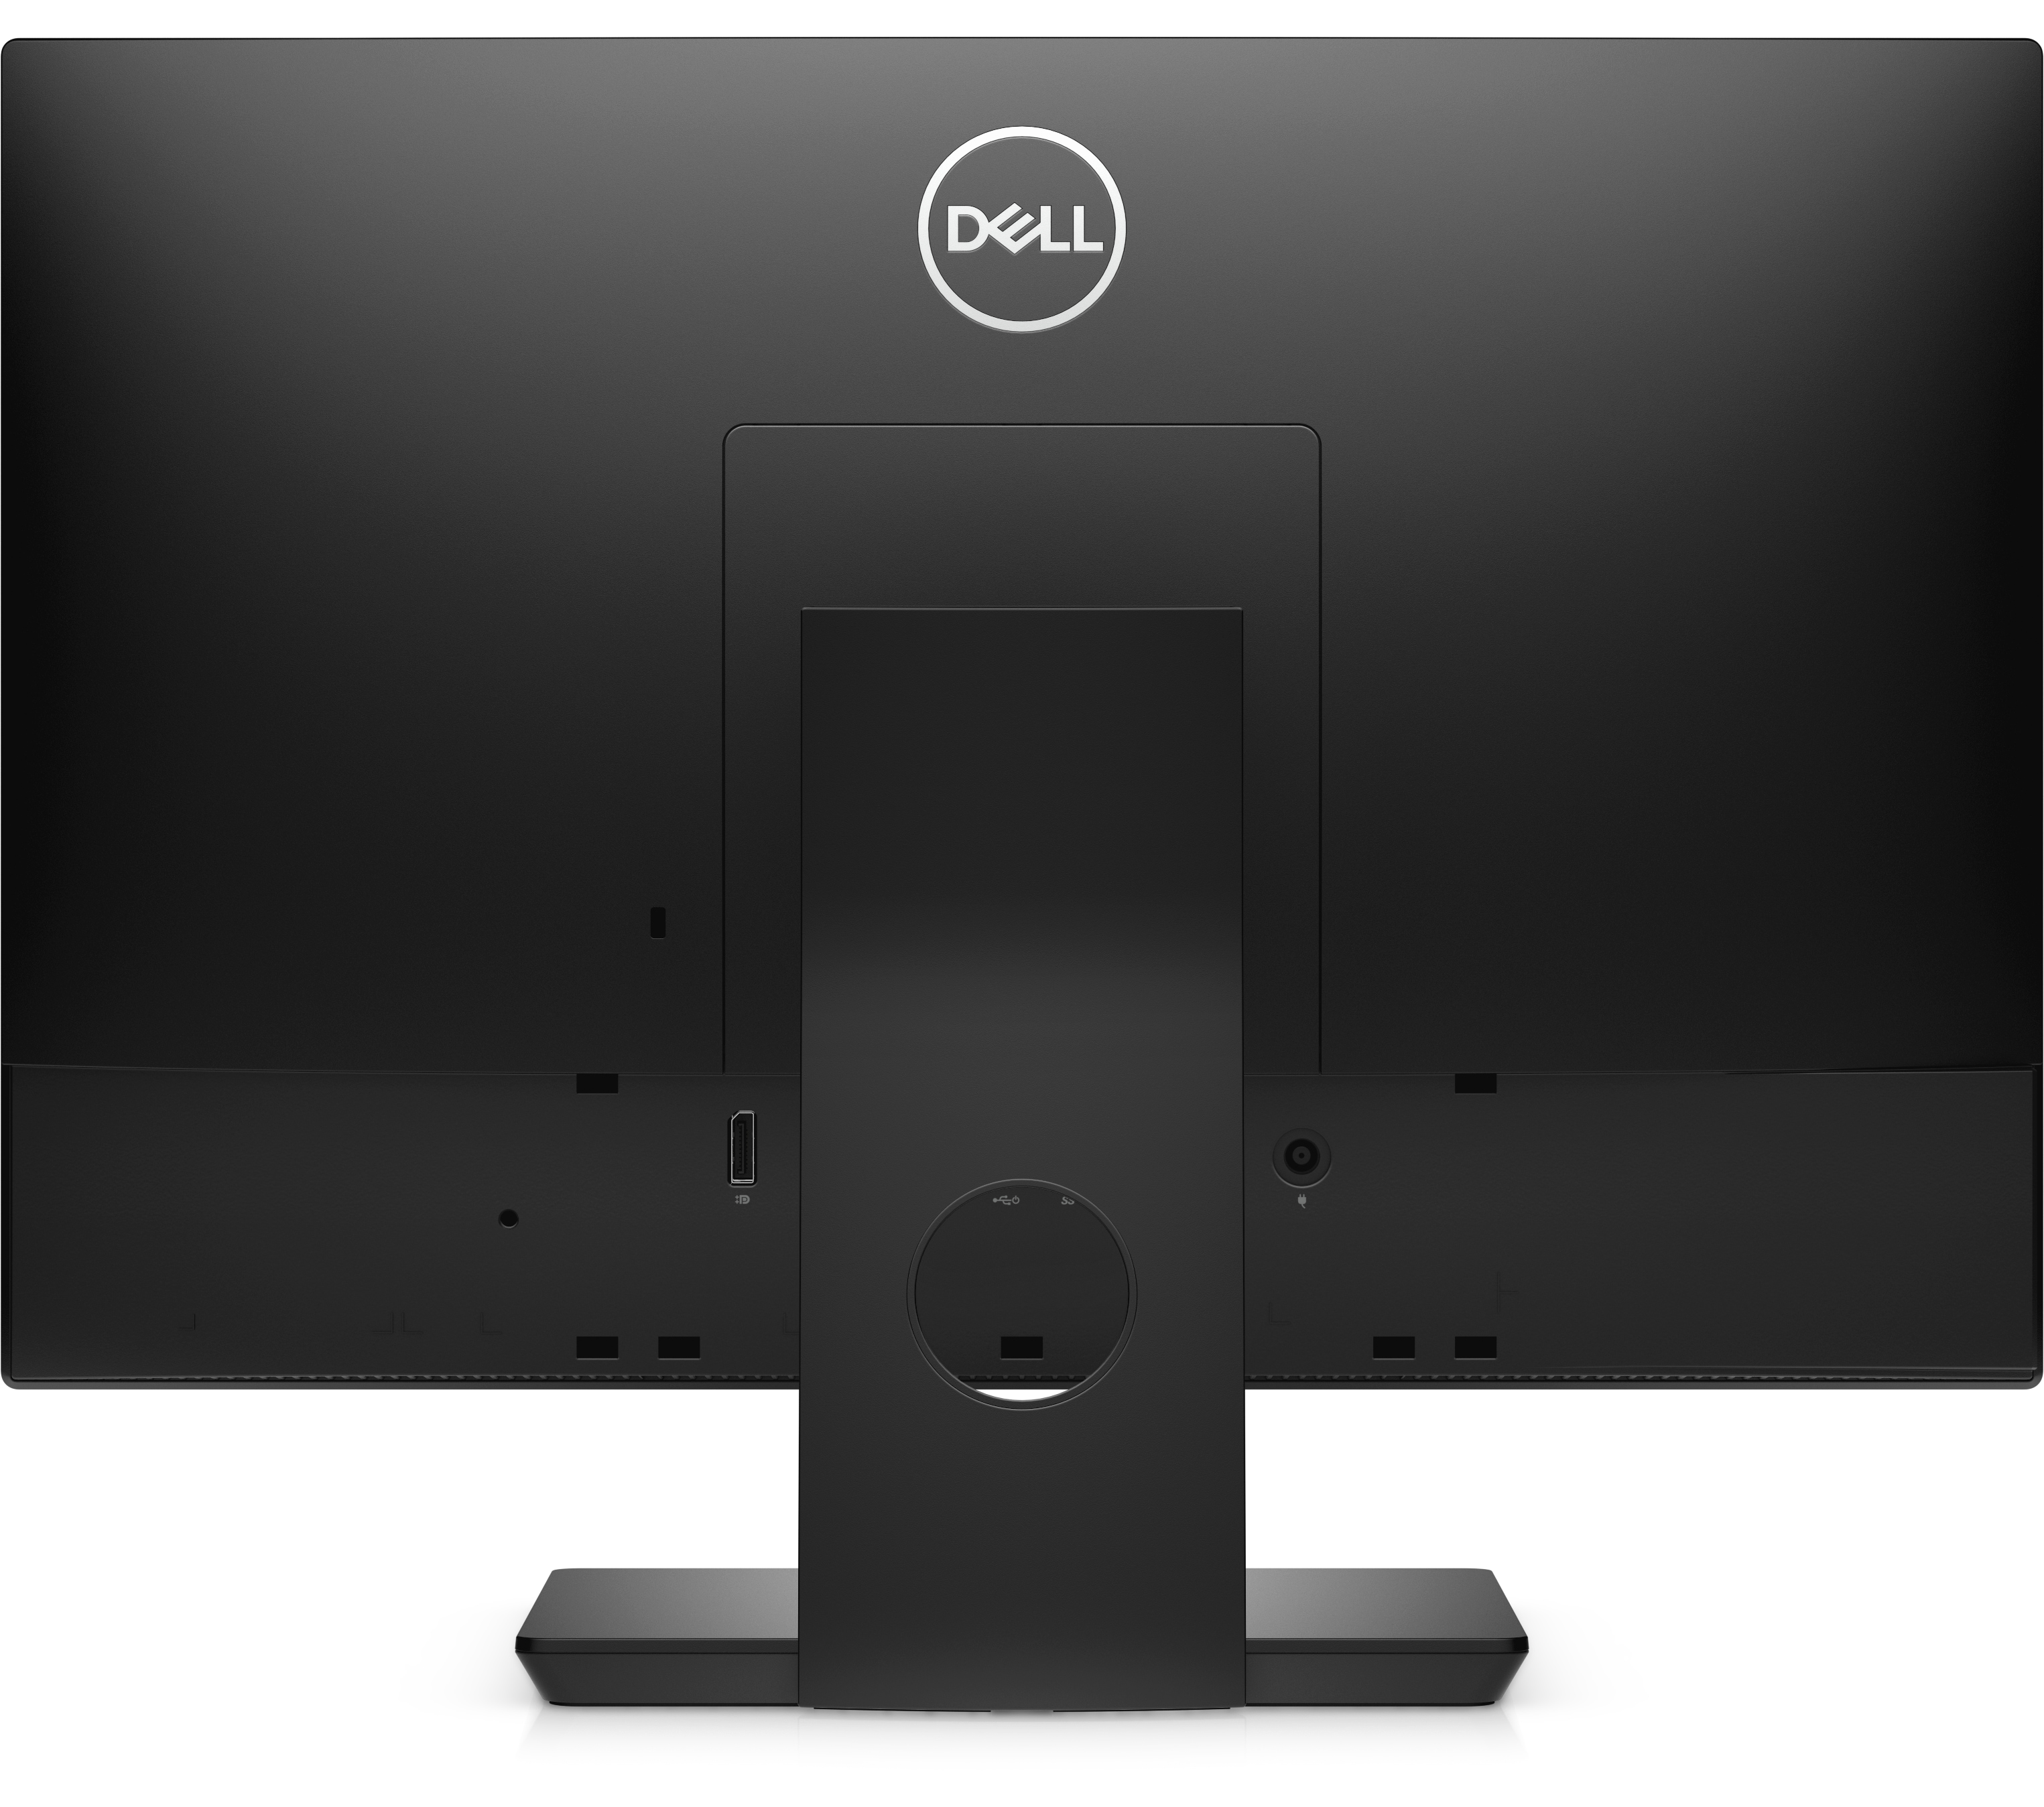 OptiPlex 3280 22-Inch All-in-One PC with FHD Display | Dell USA